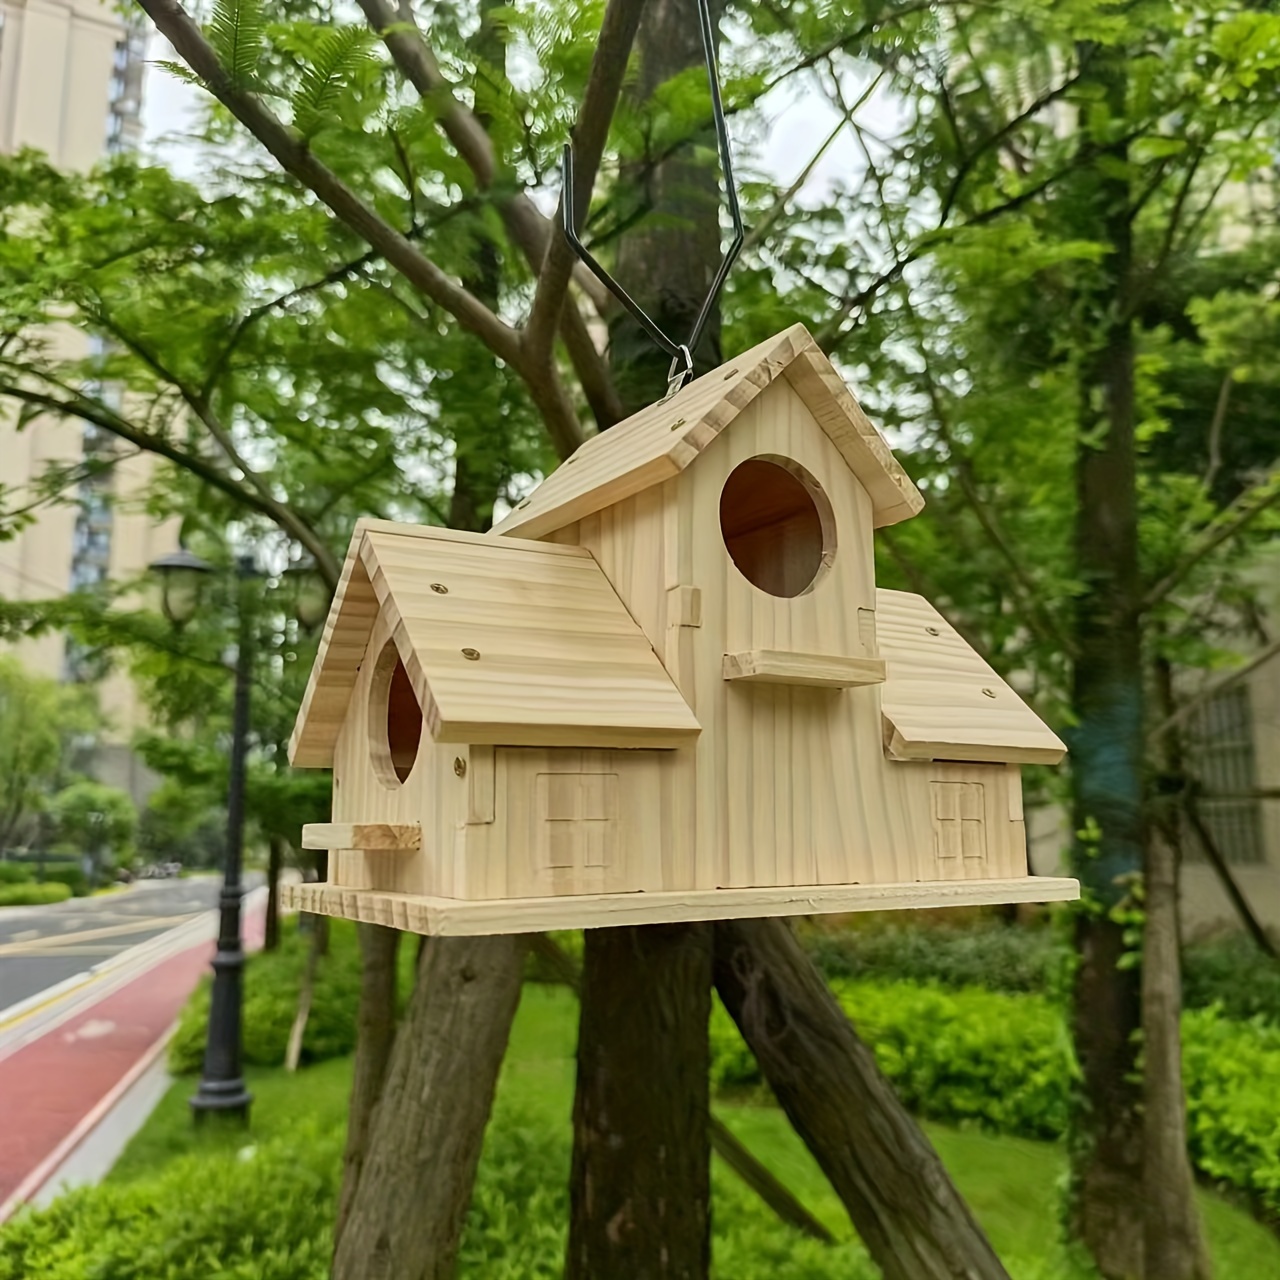 

Charming Wooden Birdhouse For Outdoor Garden - 3-hole Hanging Nest For Bluebirds, Finches & - Perfect Gift For Nature Lovers Bird House Bird Houses For Outside